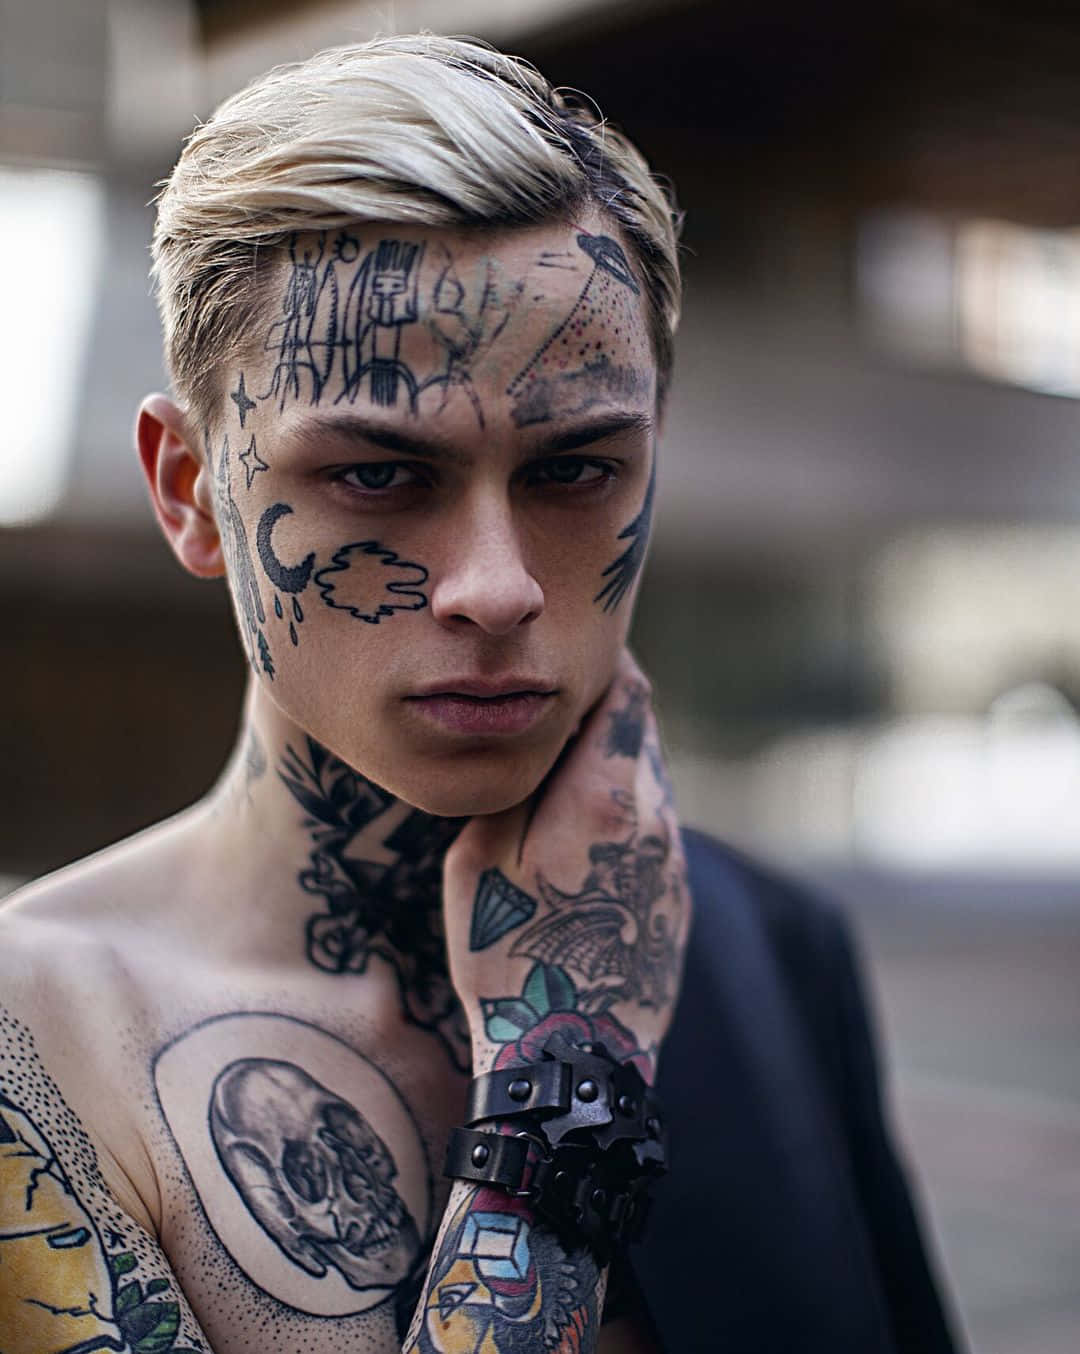 A Young Man With Tattoos On His Body